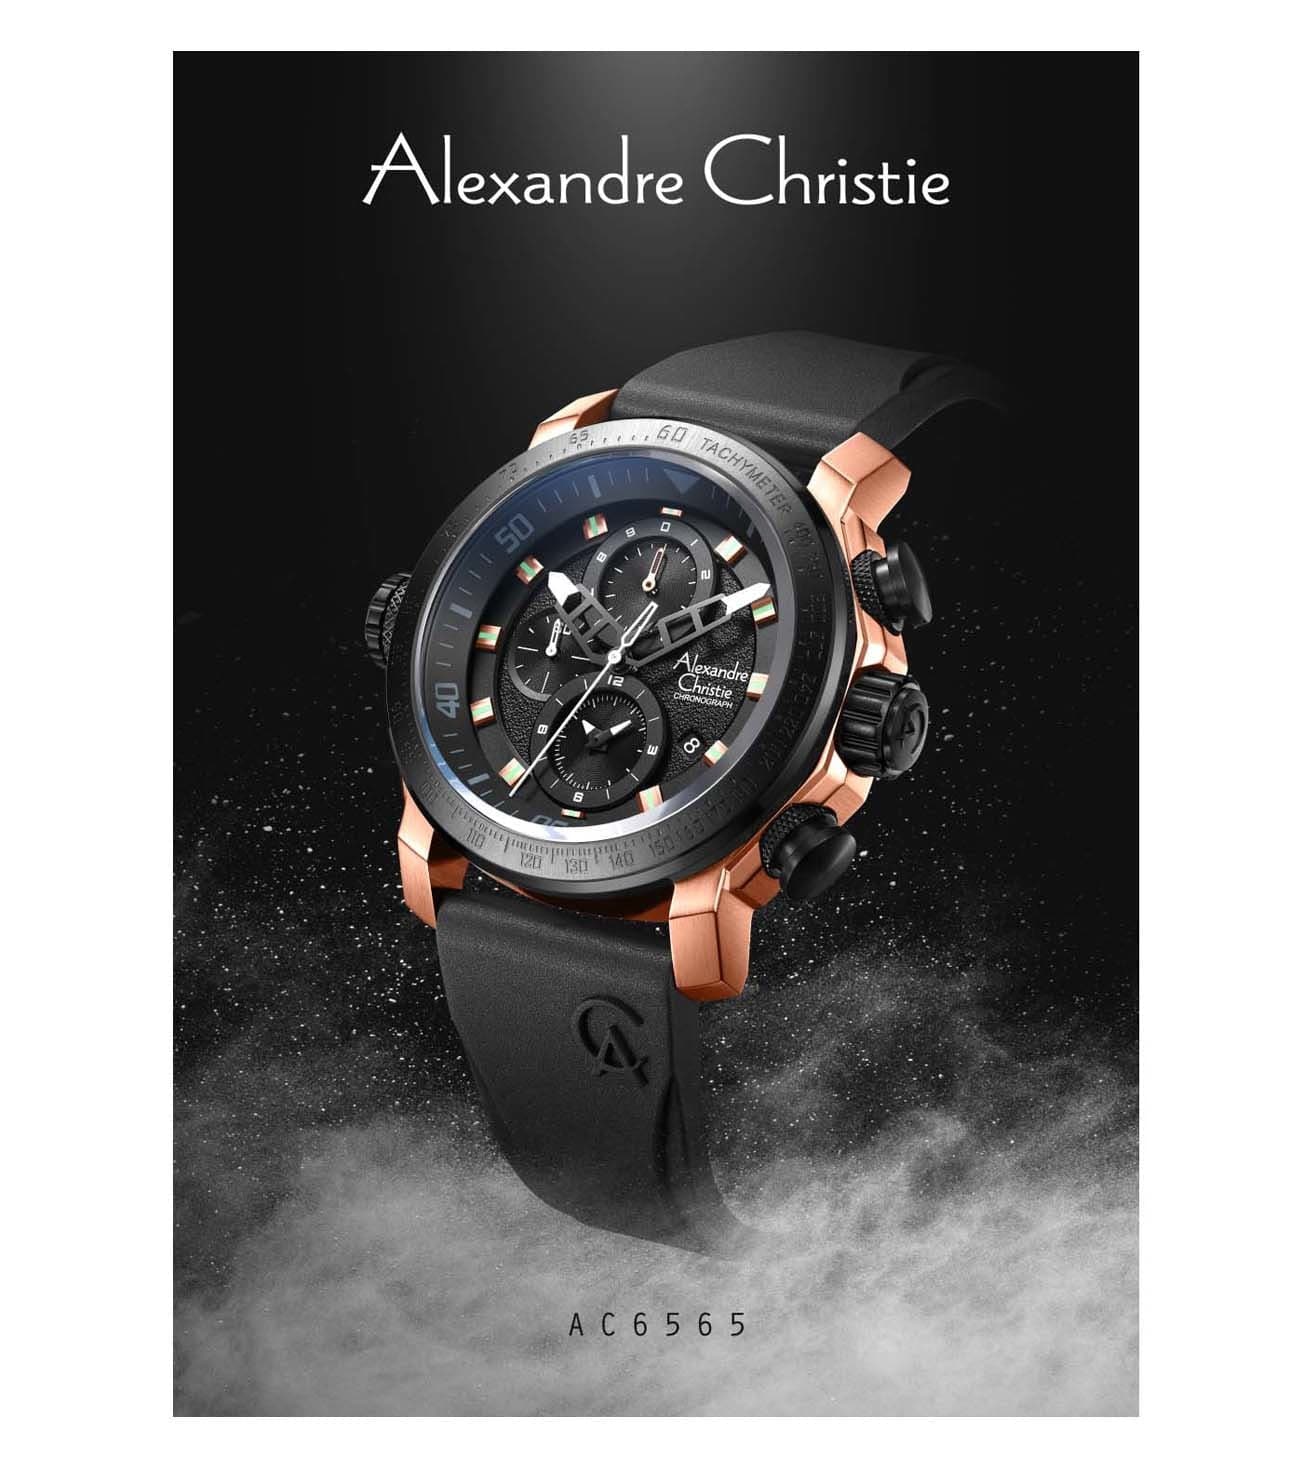 Alexandre II Limited edition stainless steel chronograph wristwatch Circa  2005 | Fine Watches including Masterworks of Time, Collector's Watches |  2022 | Sotheby's